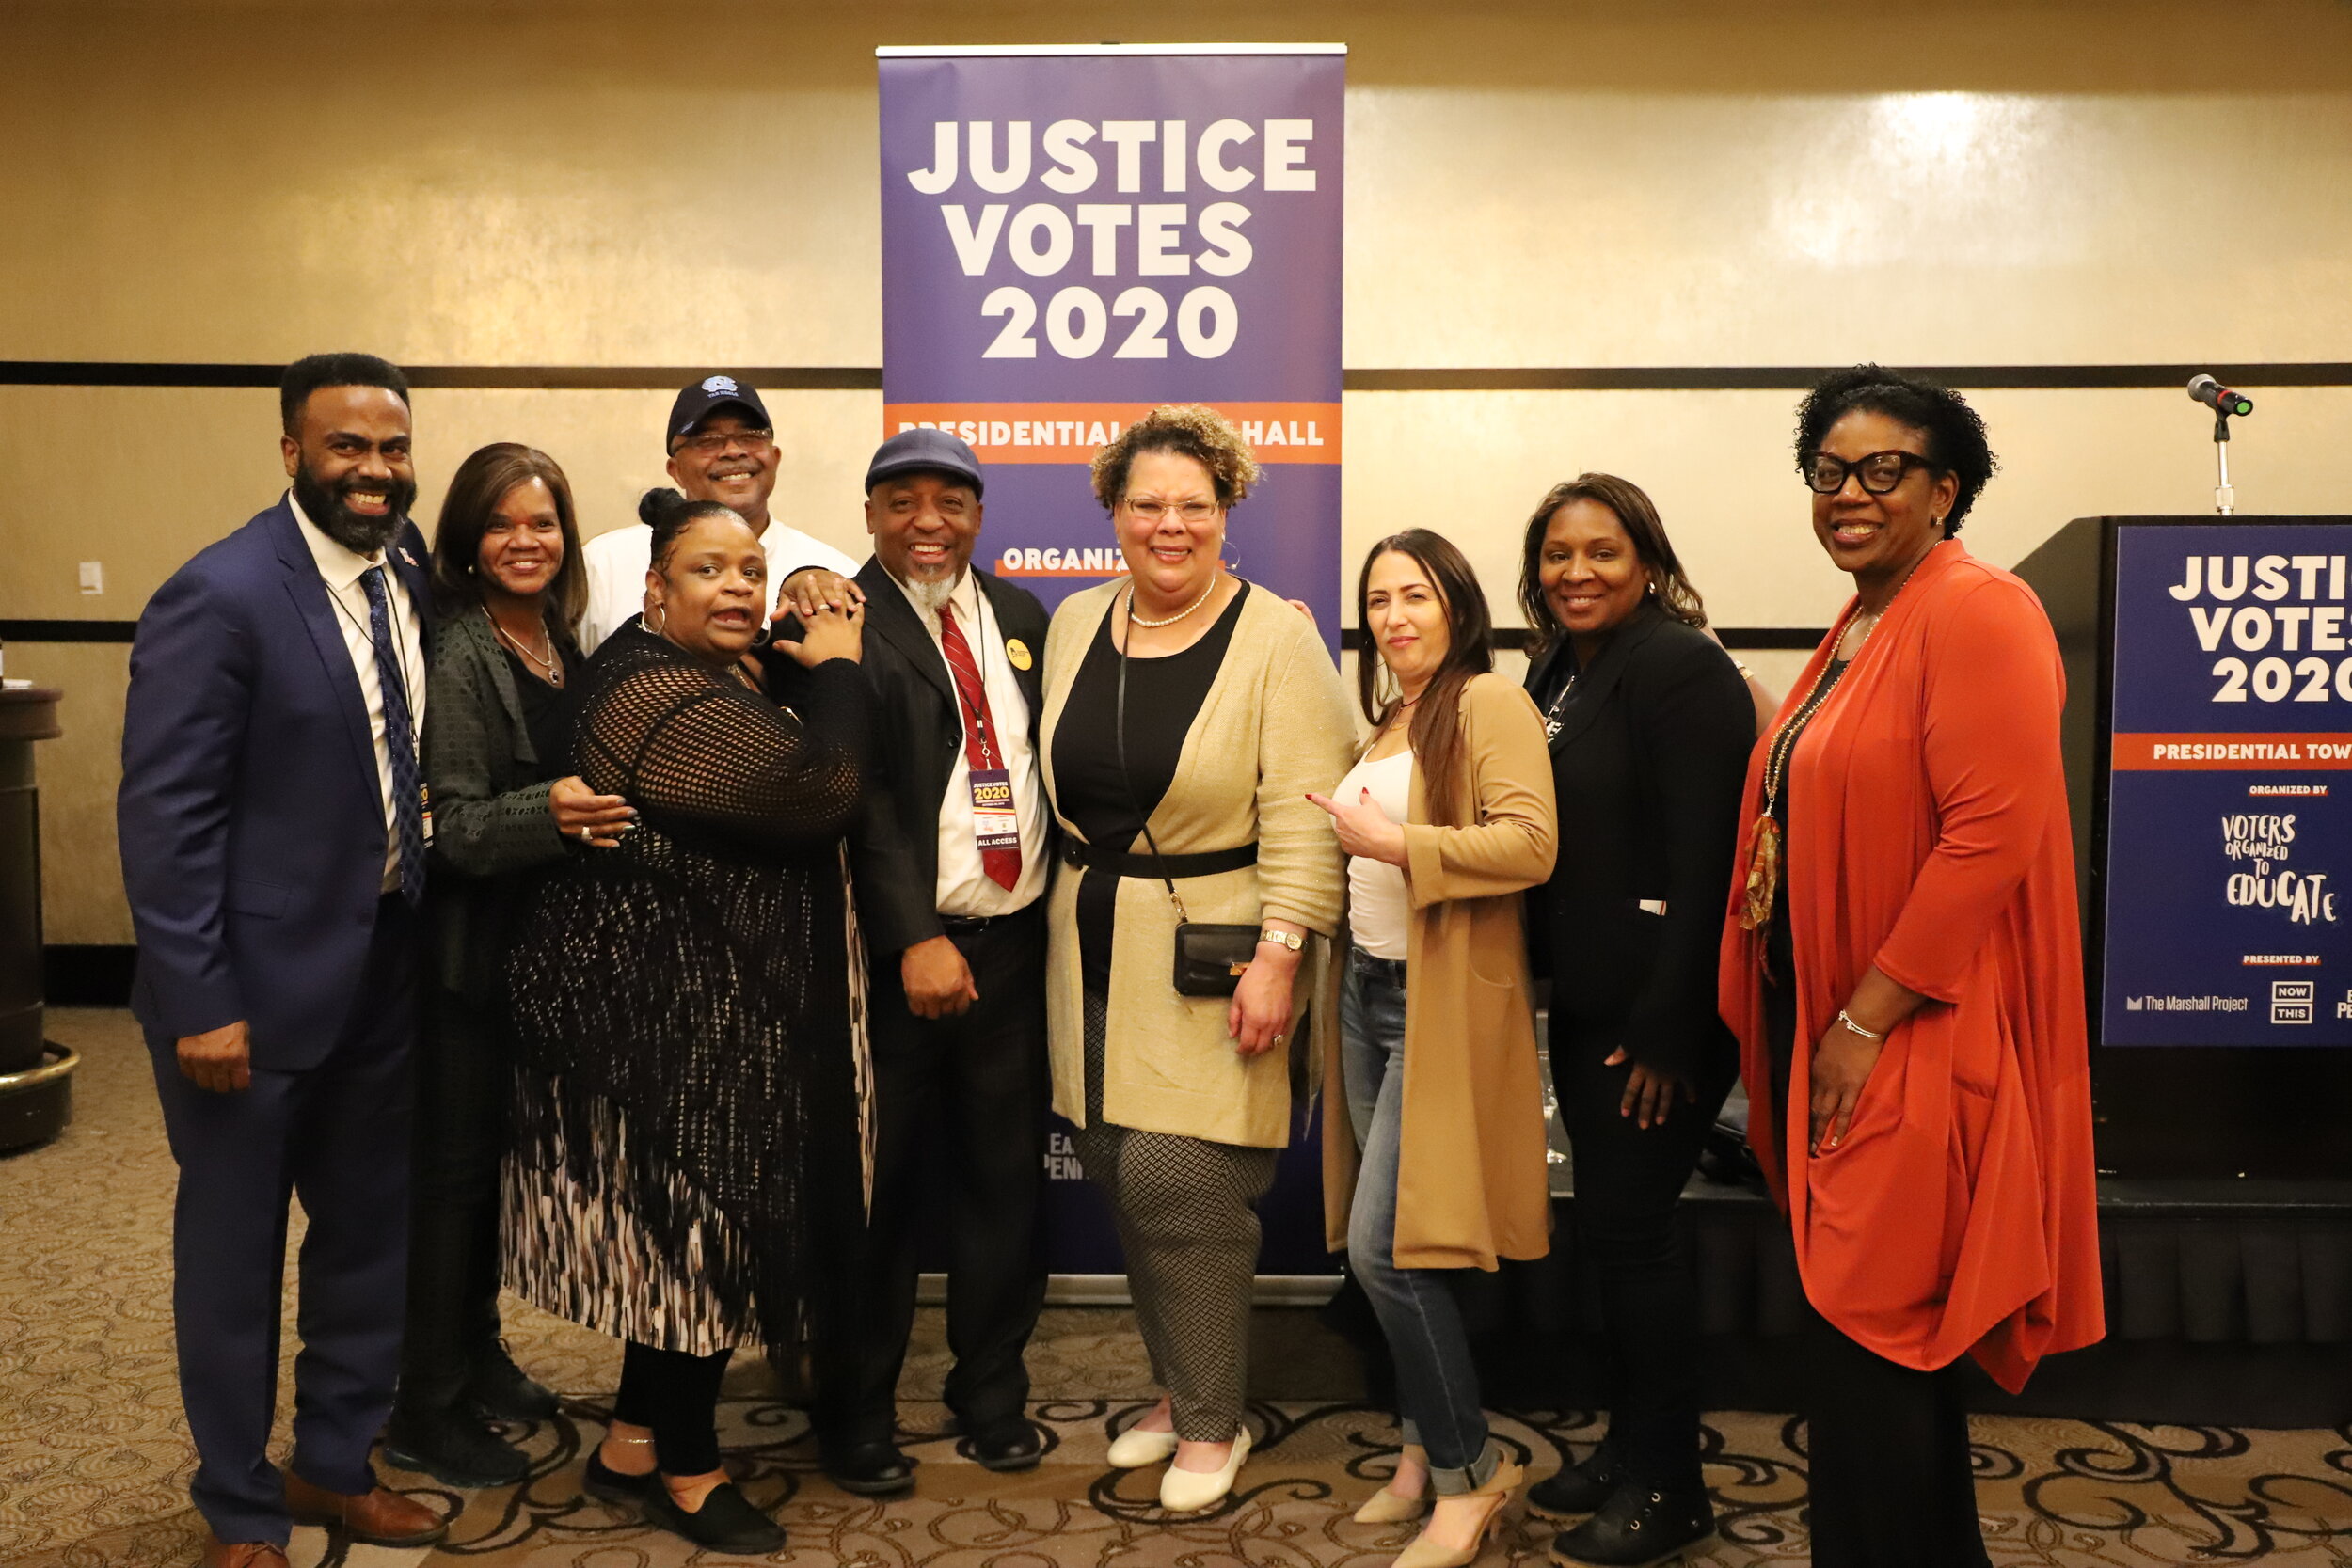 Yolanda (second from left) with CJ advocates at the historic Justice Votes Town Hall in 2019